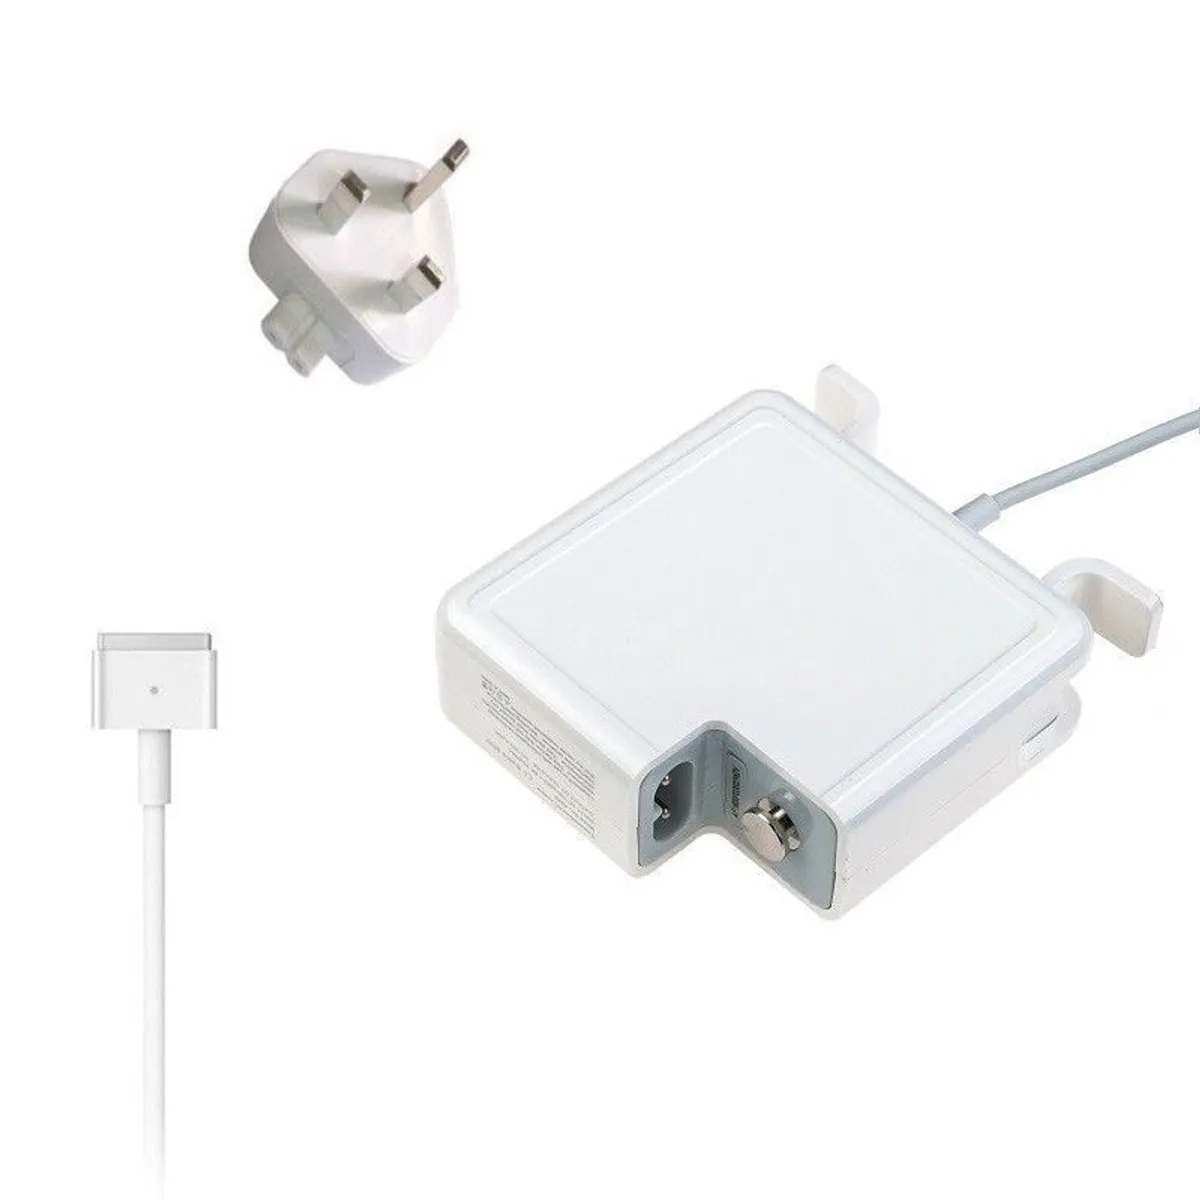 45W T Power Charger Adapter For Apple Magsafe 2 Mac Macbook Air 13/11 A1466/1465 (14.85V, 3.05A) - Image 1